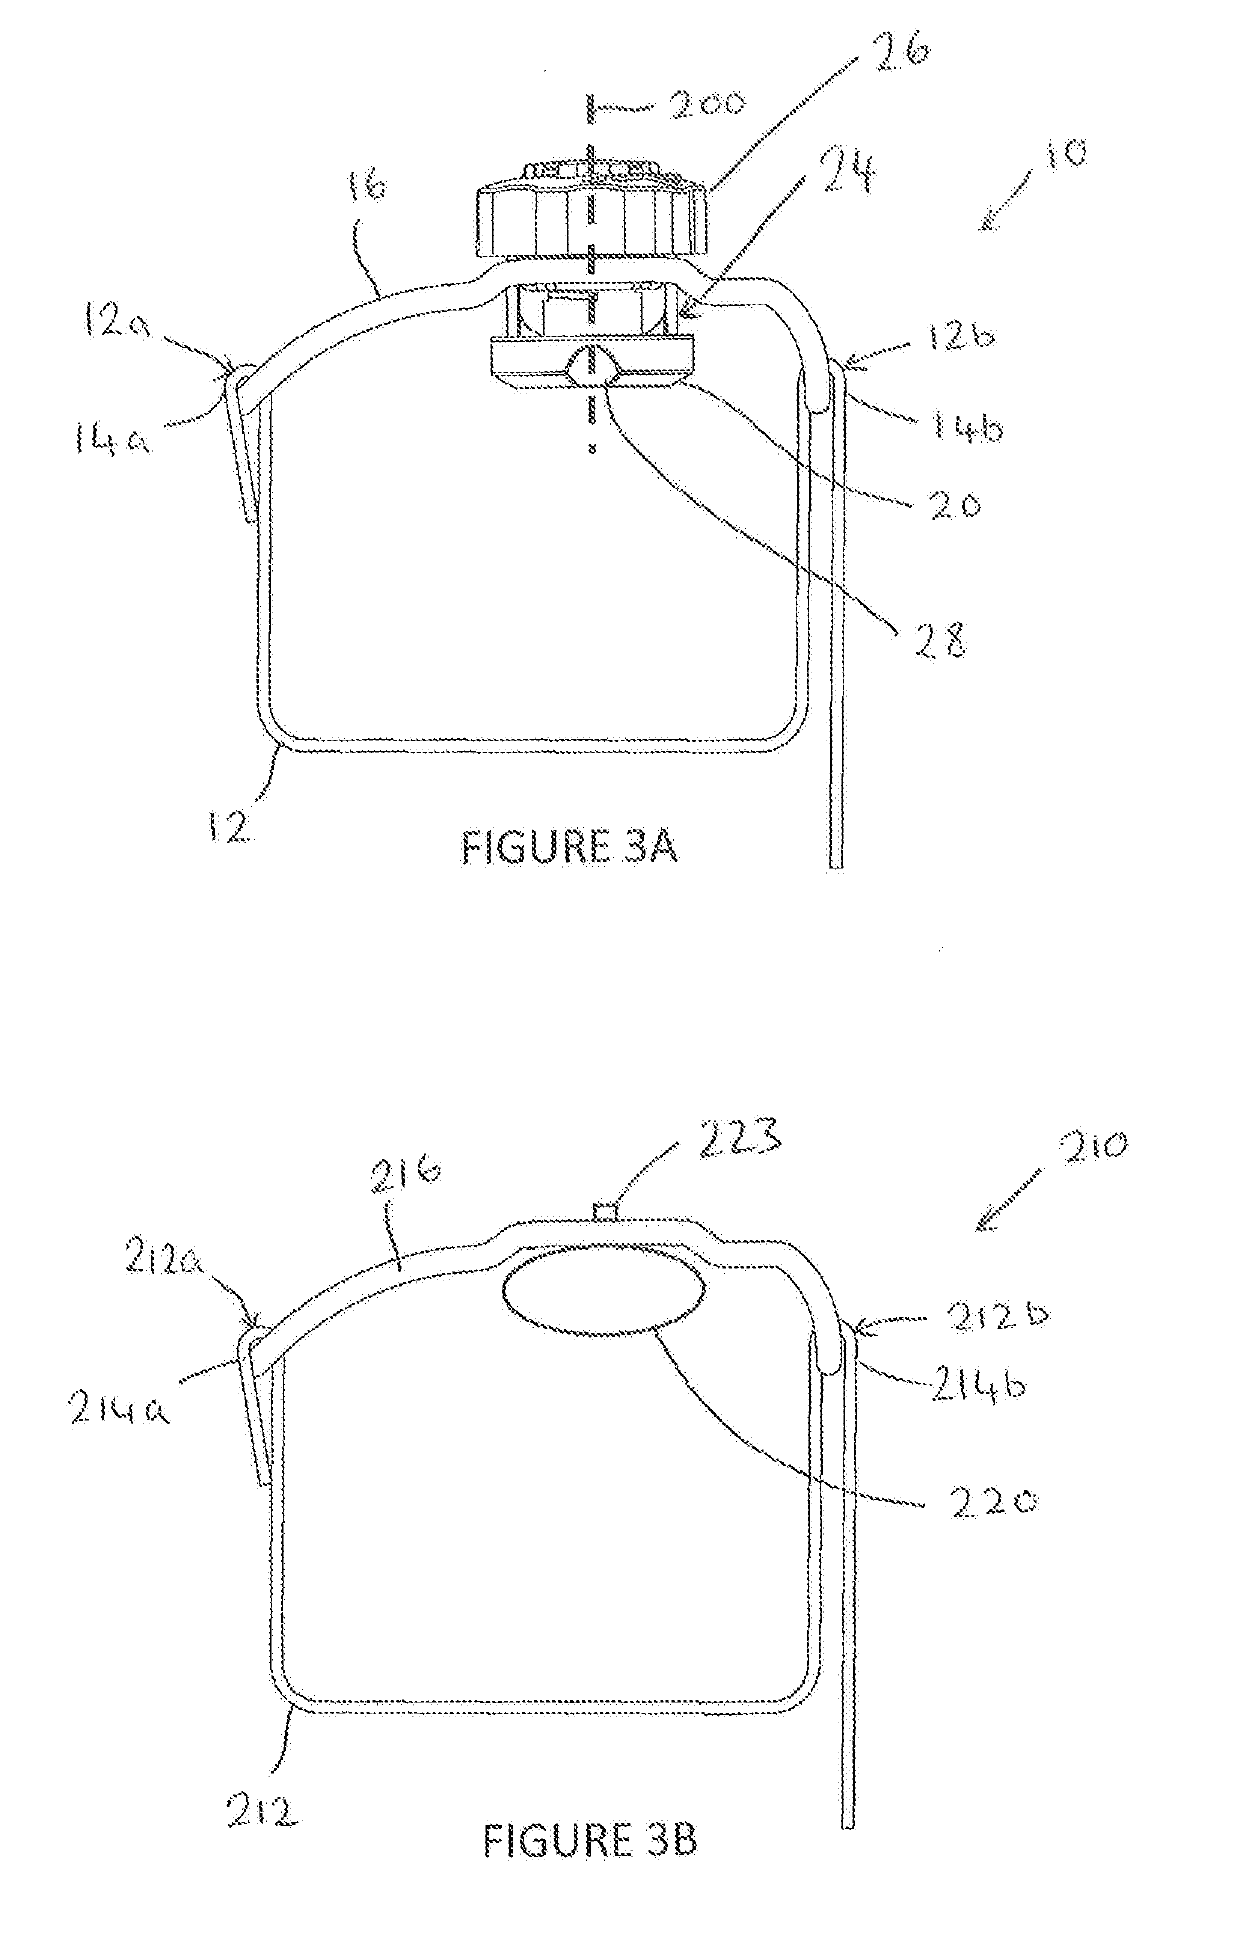 Arterial compression device and methods of using the same